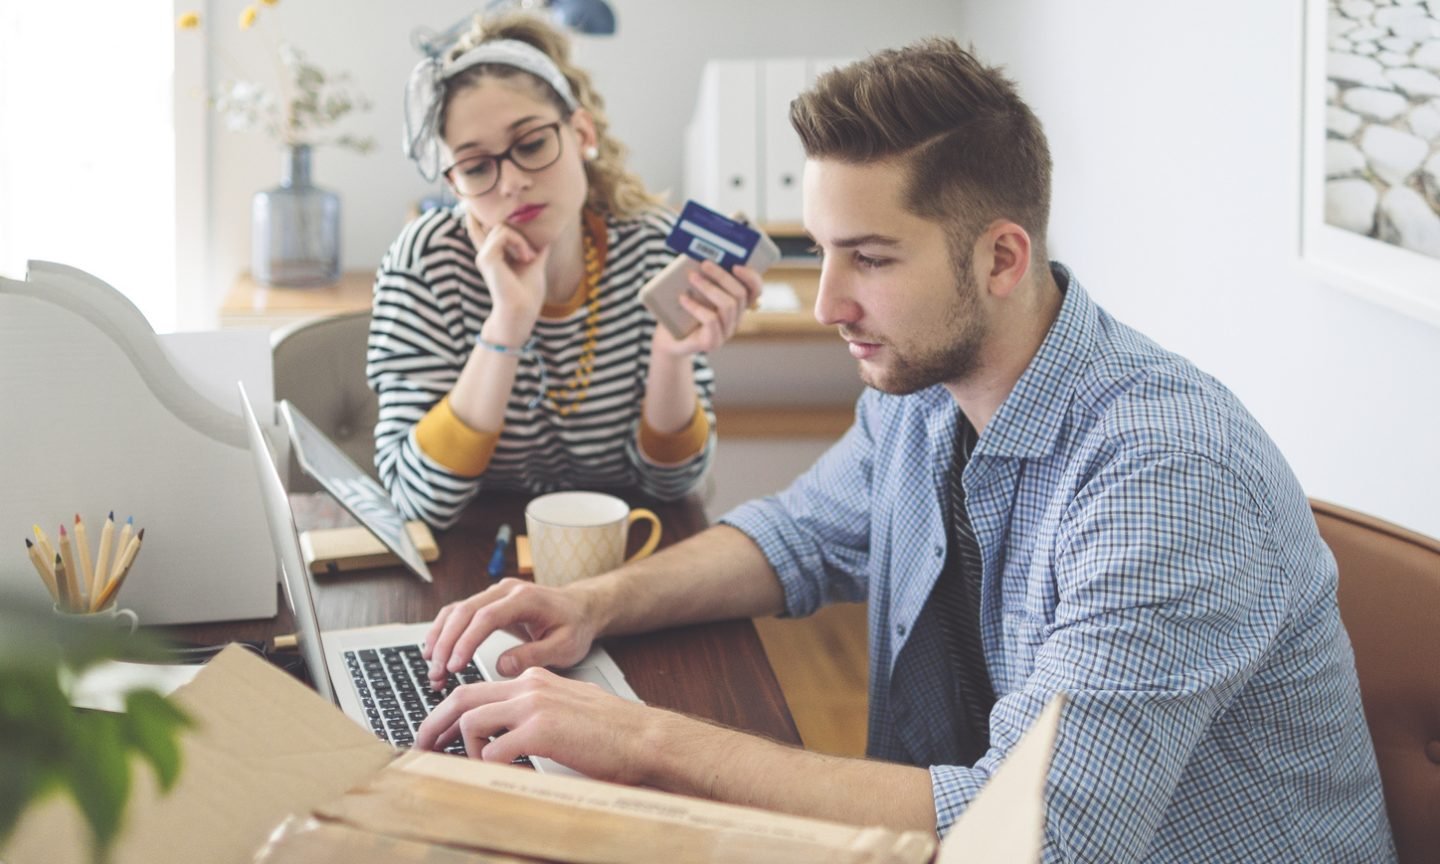 Can't Get a Credit Card? Try These Alternative Options - NerdWallet